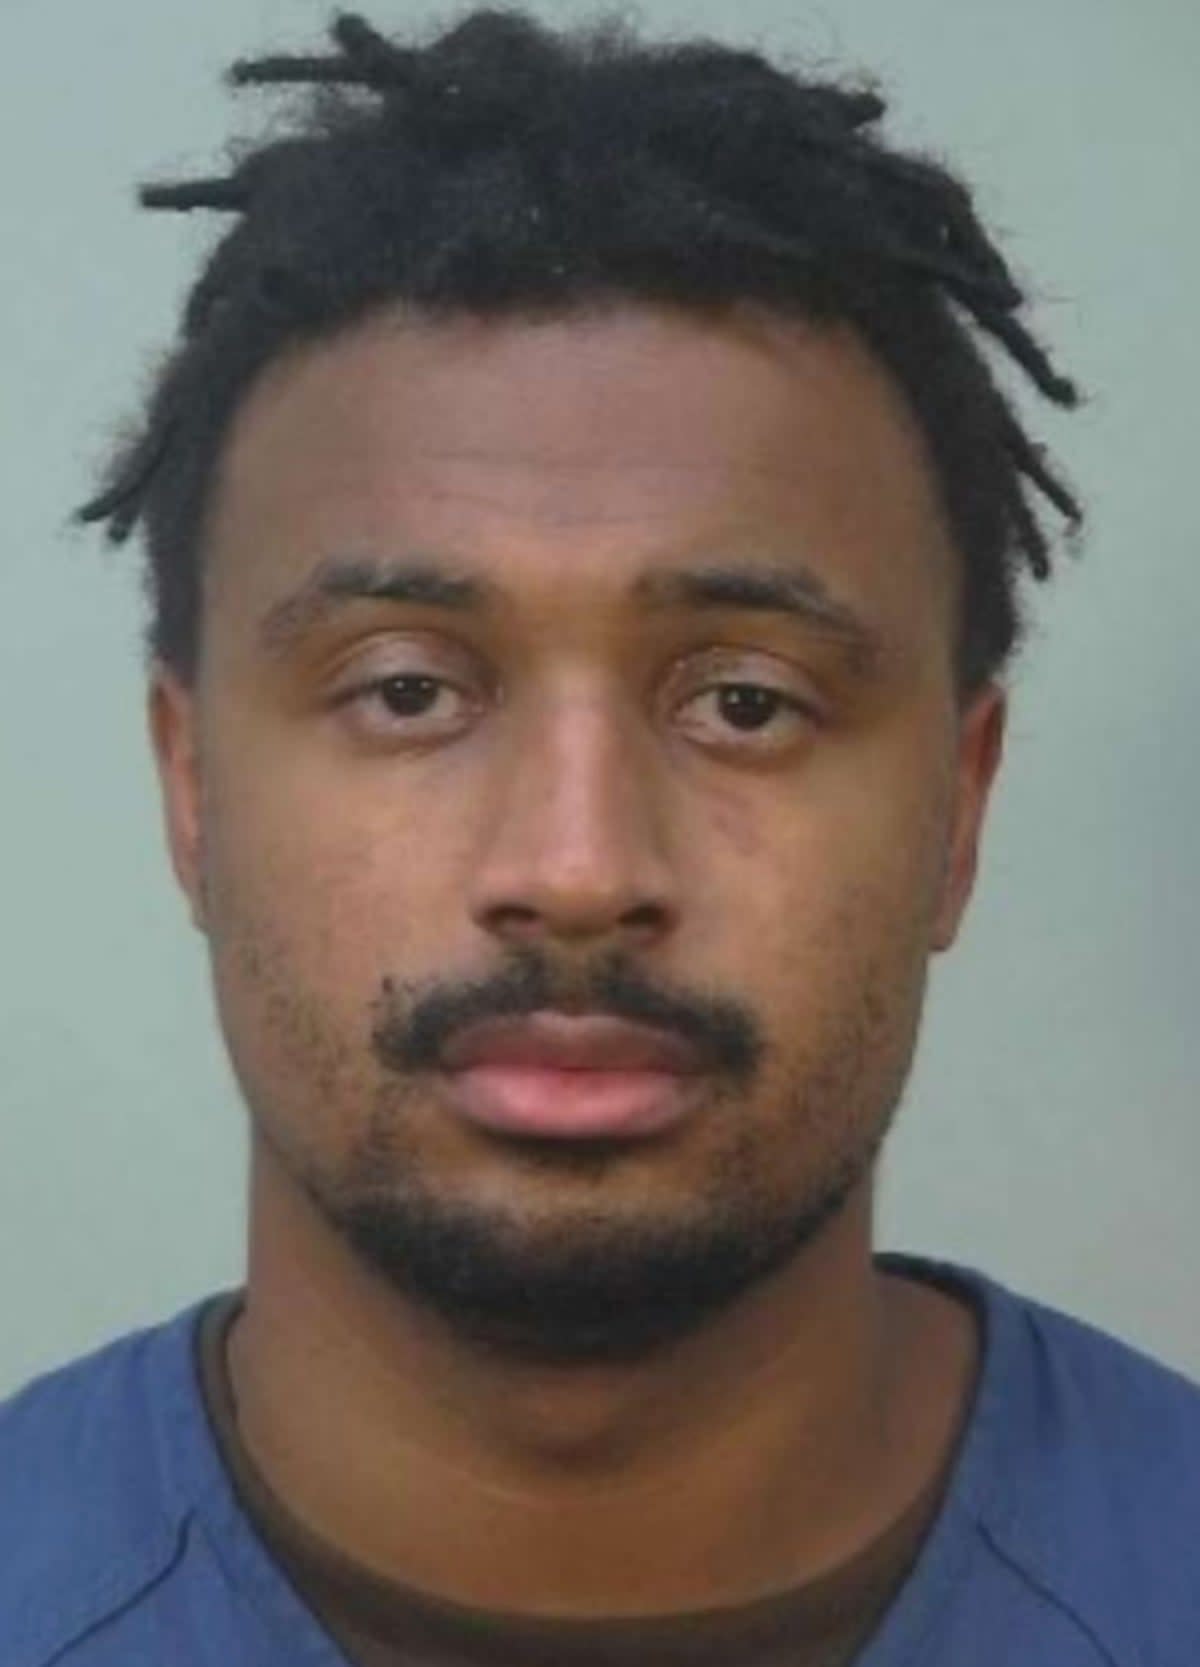 Brandon Thompson, 26, is awaiting charges of sexual assault, reckless injury, and strangulation in connection with the attack that left a young woman in her 20s critically injured (Madison Police Department)